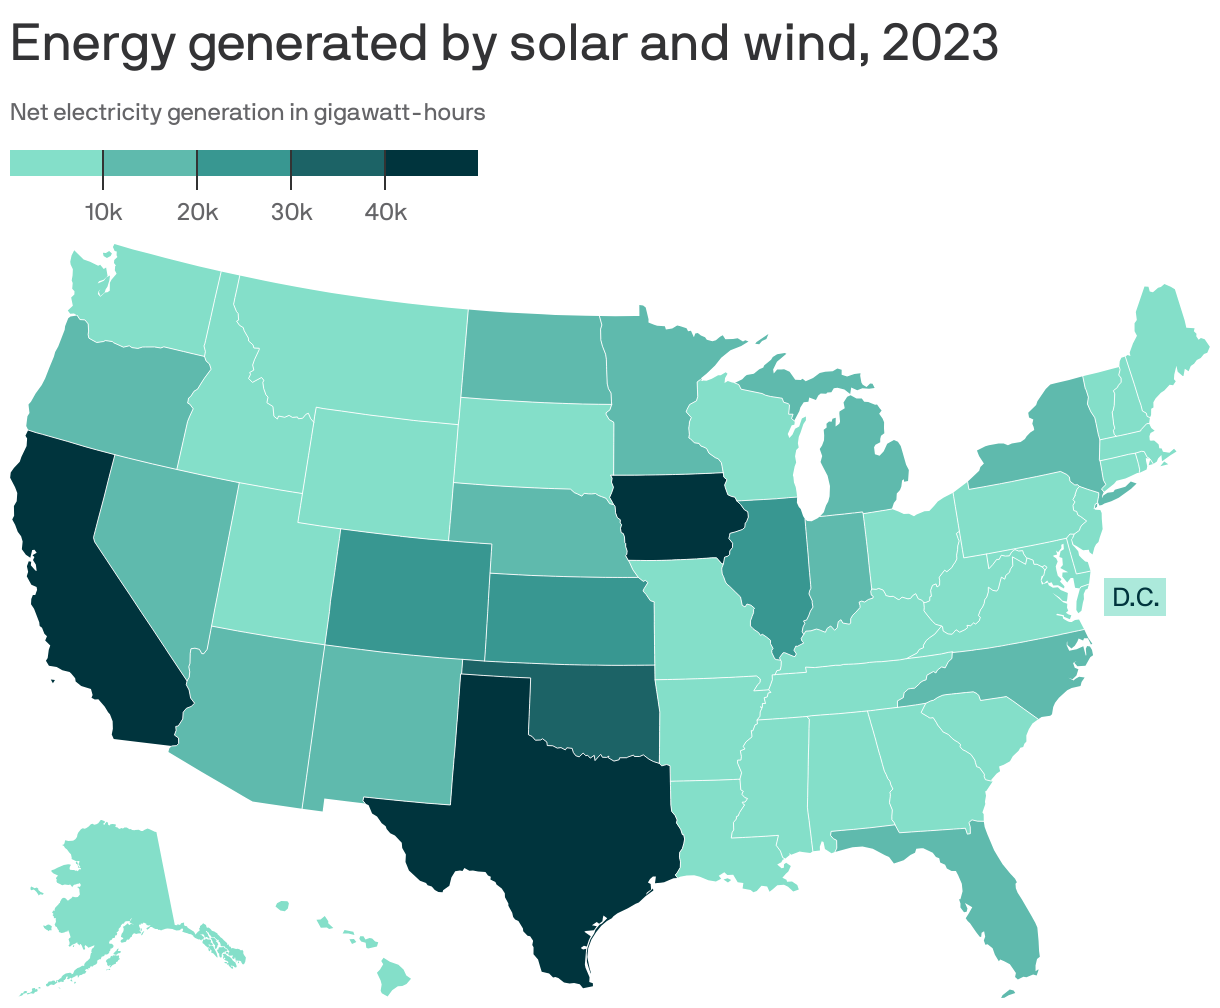 Texas emerges as top solar and wind producer - Axios Austin